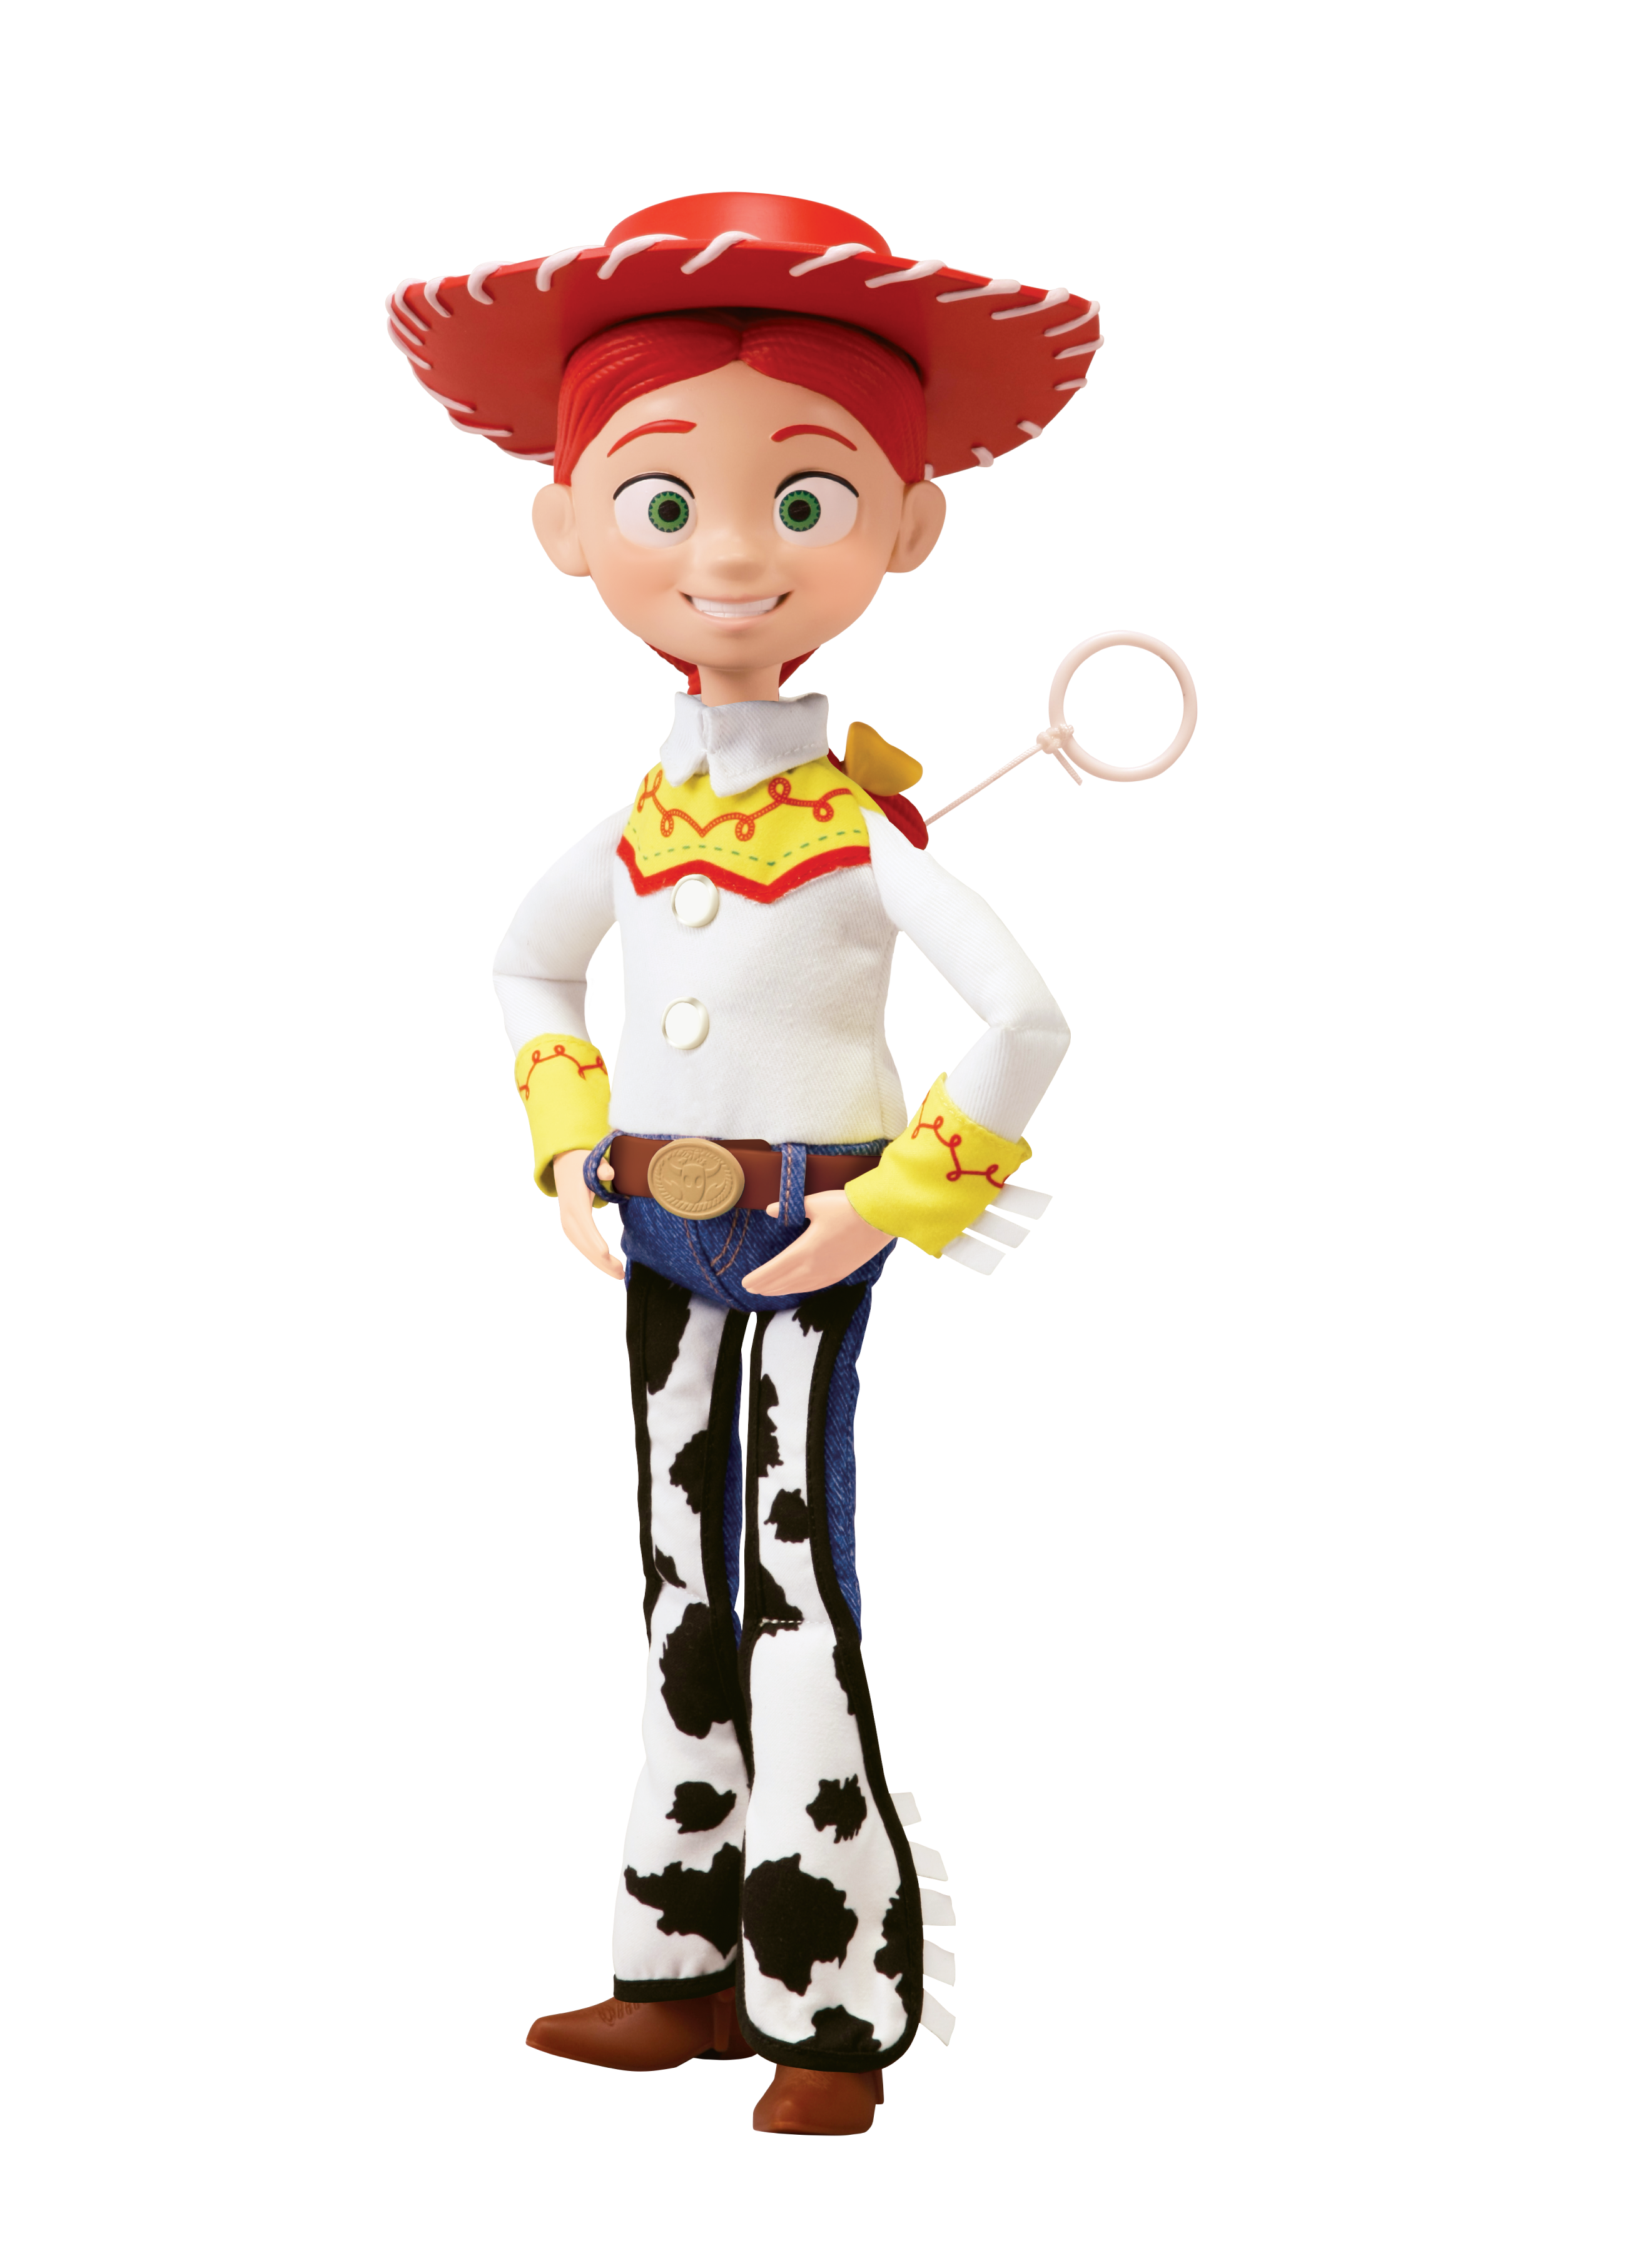 toy story 4 jessie talking action figure